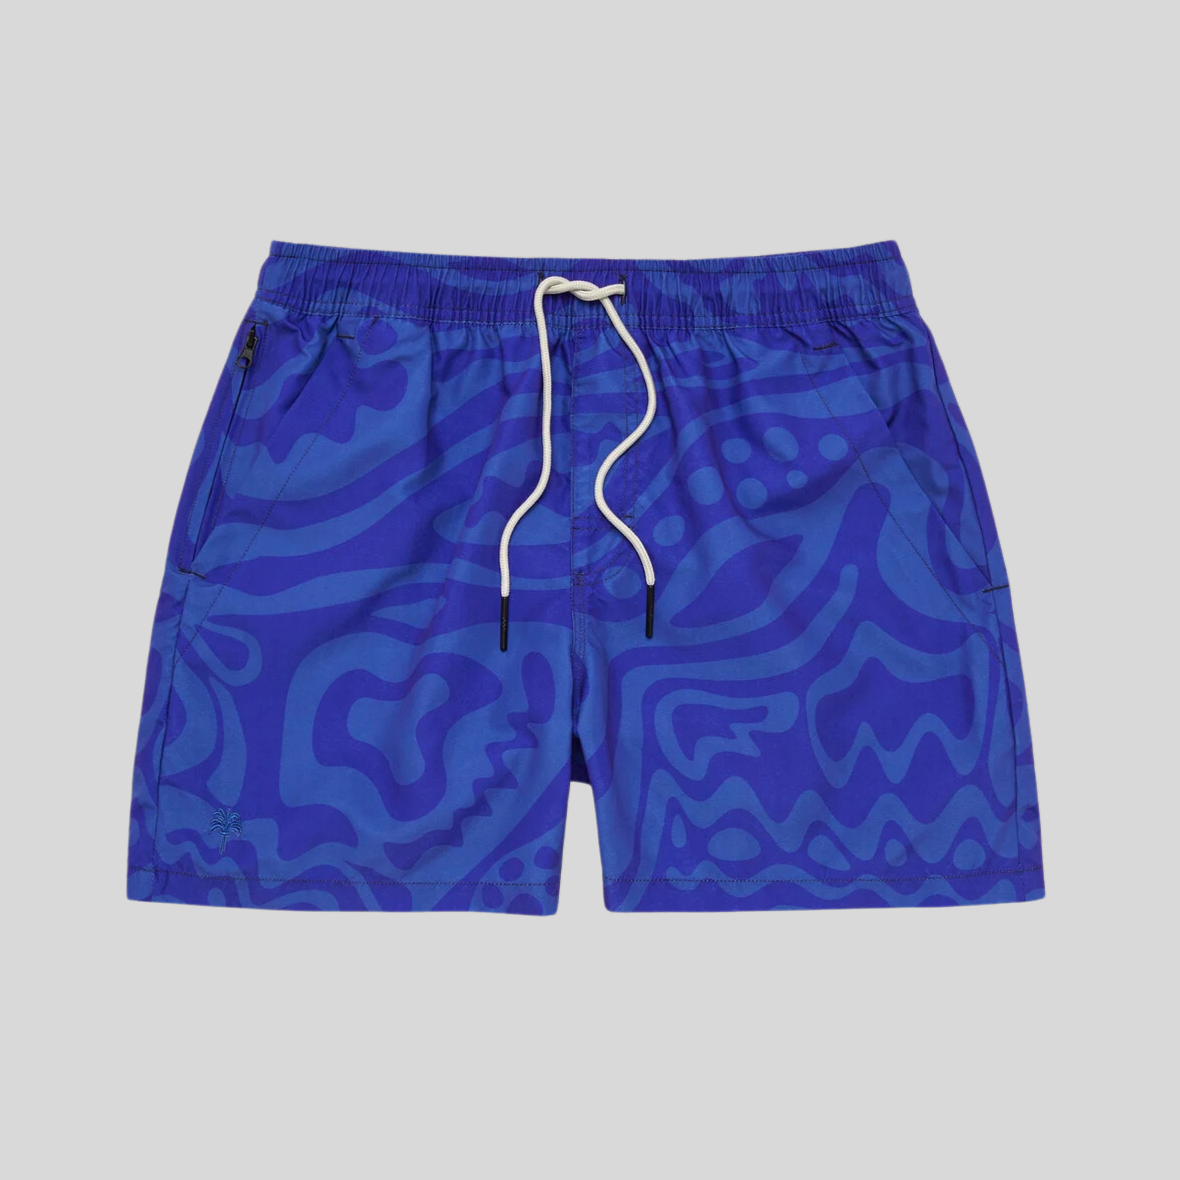 Gotstyle Fashion - OAS Shorts Flowing Abstract Print Swim Shorts - Blue